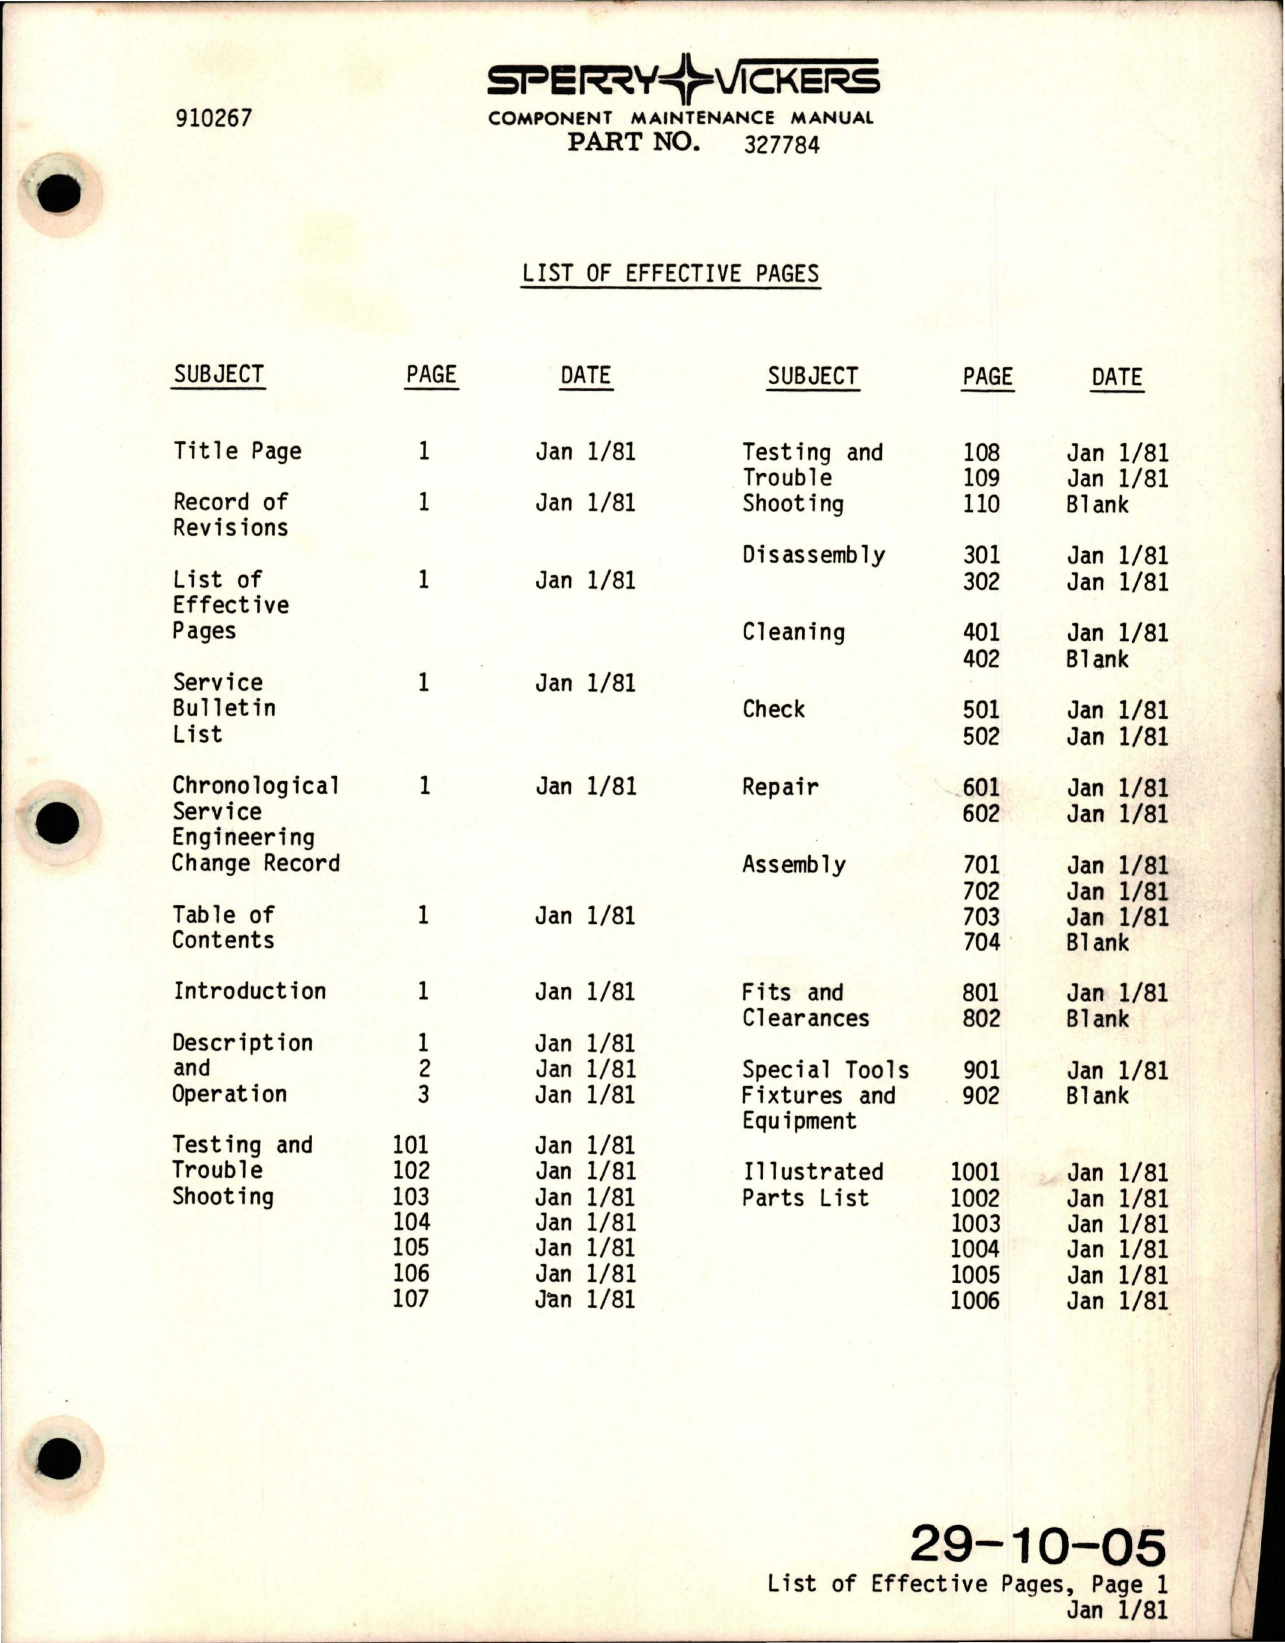 Sample page 5 from AirCorps Library document: Maintenance Manual with Illustrated Parts List for Hydraulic Motorpump Assembly - Model MPEV3-022-5 - Part 327784